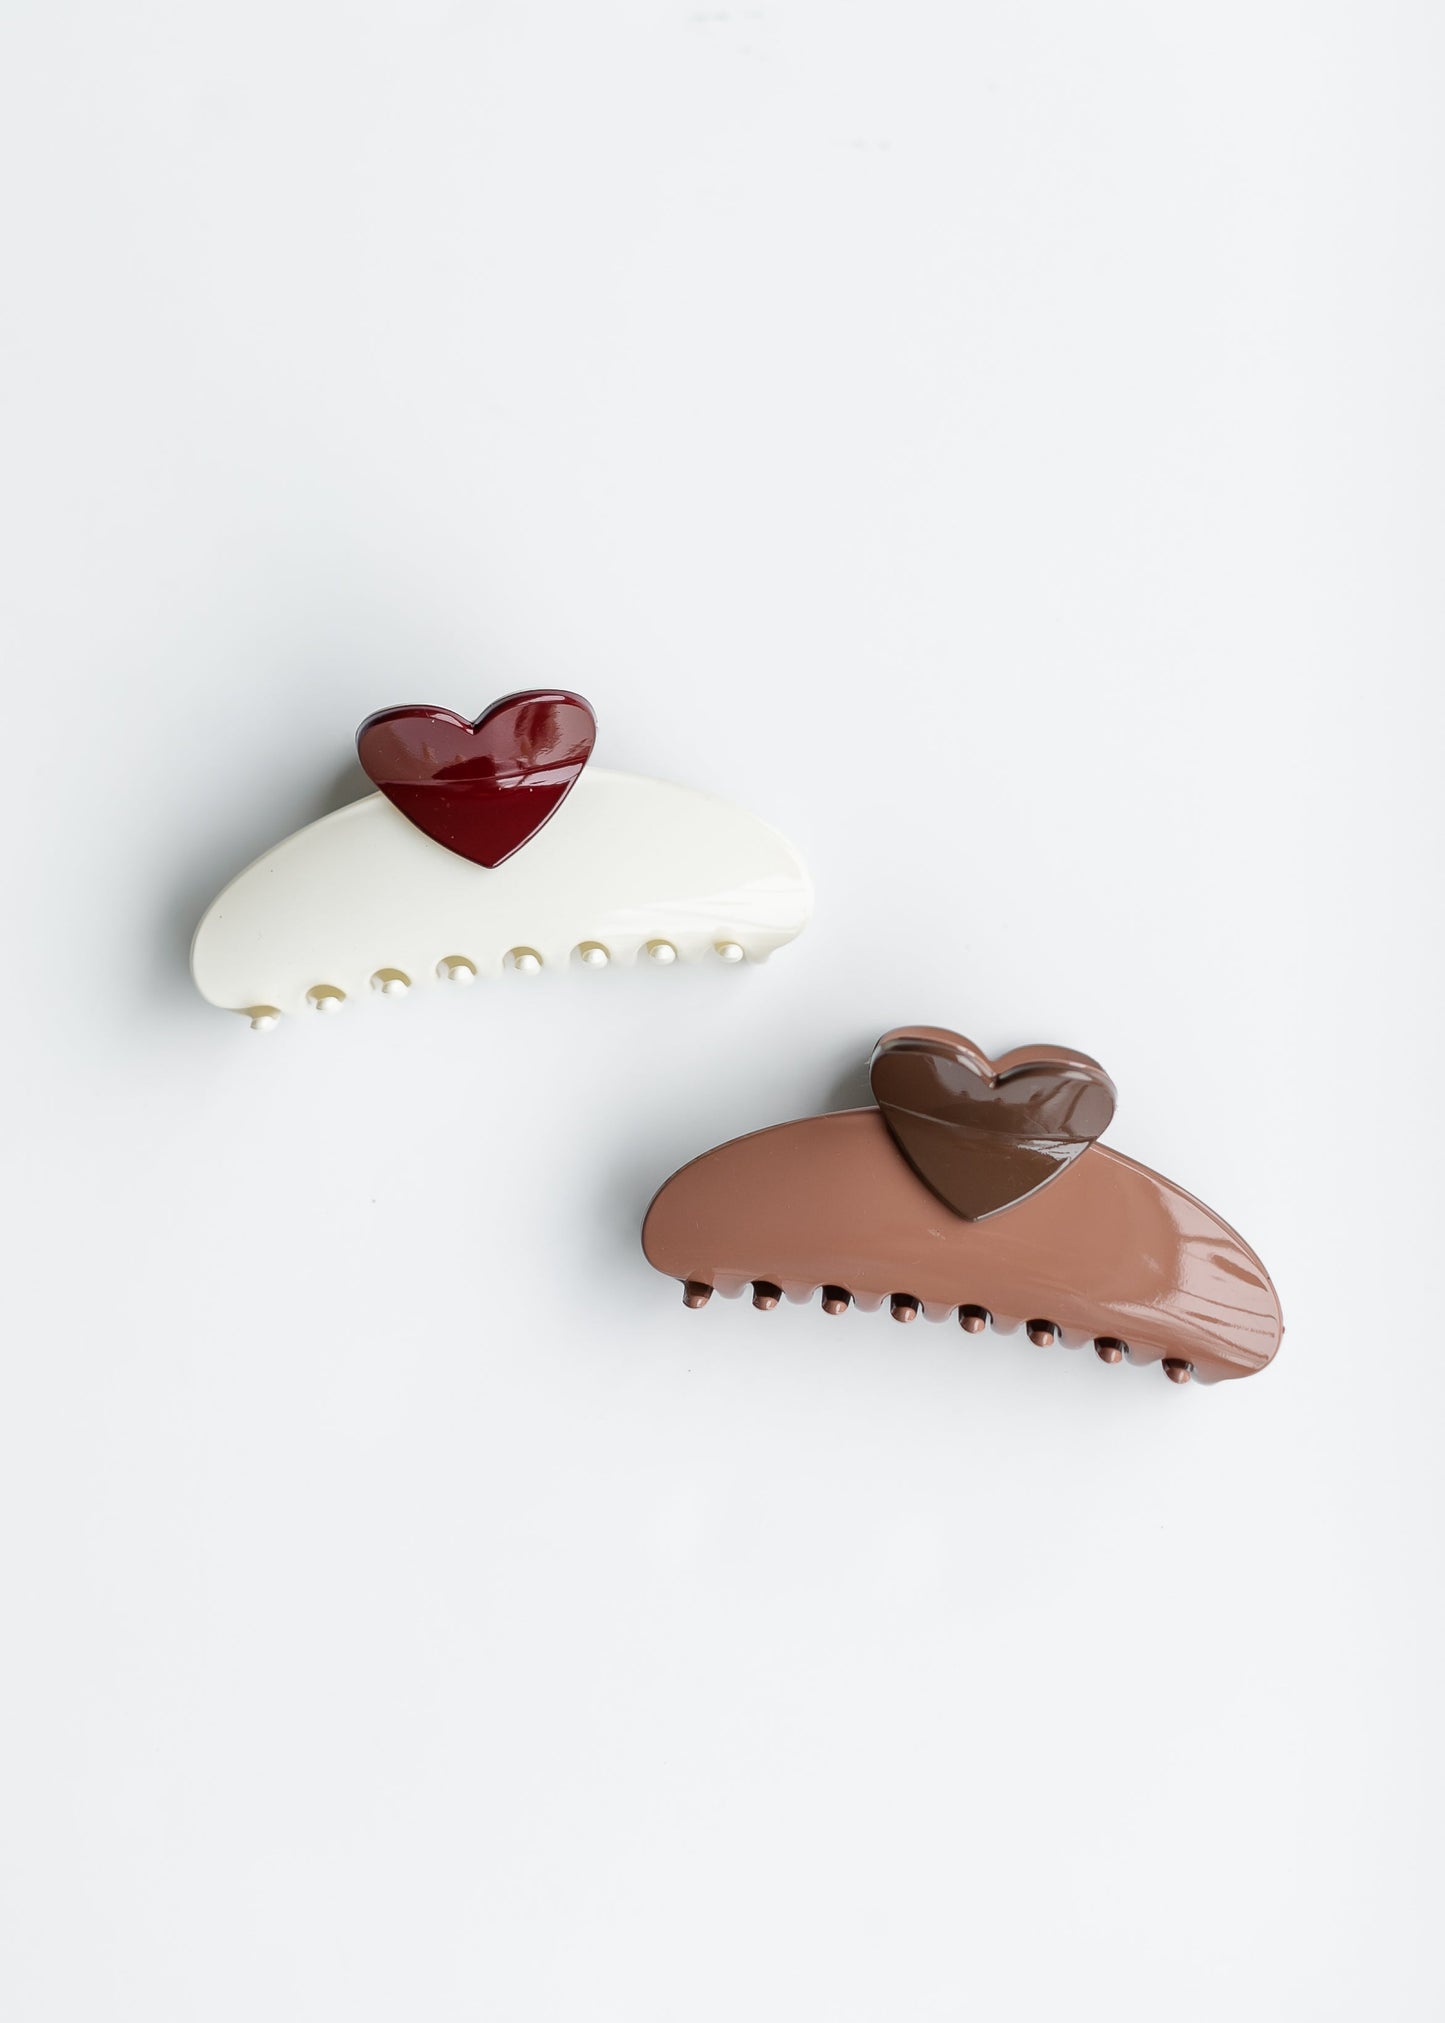 Jumbo Size Heart Hair Claw Clip Accessories